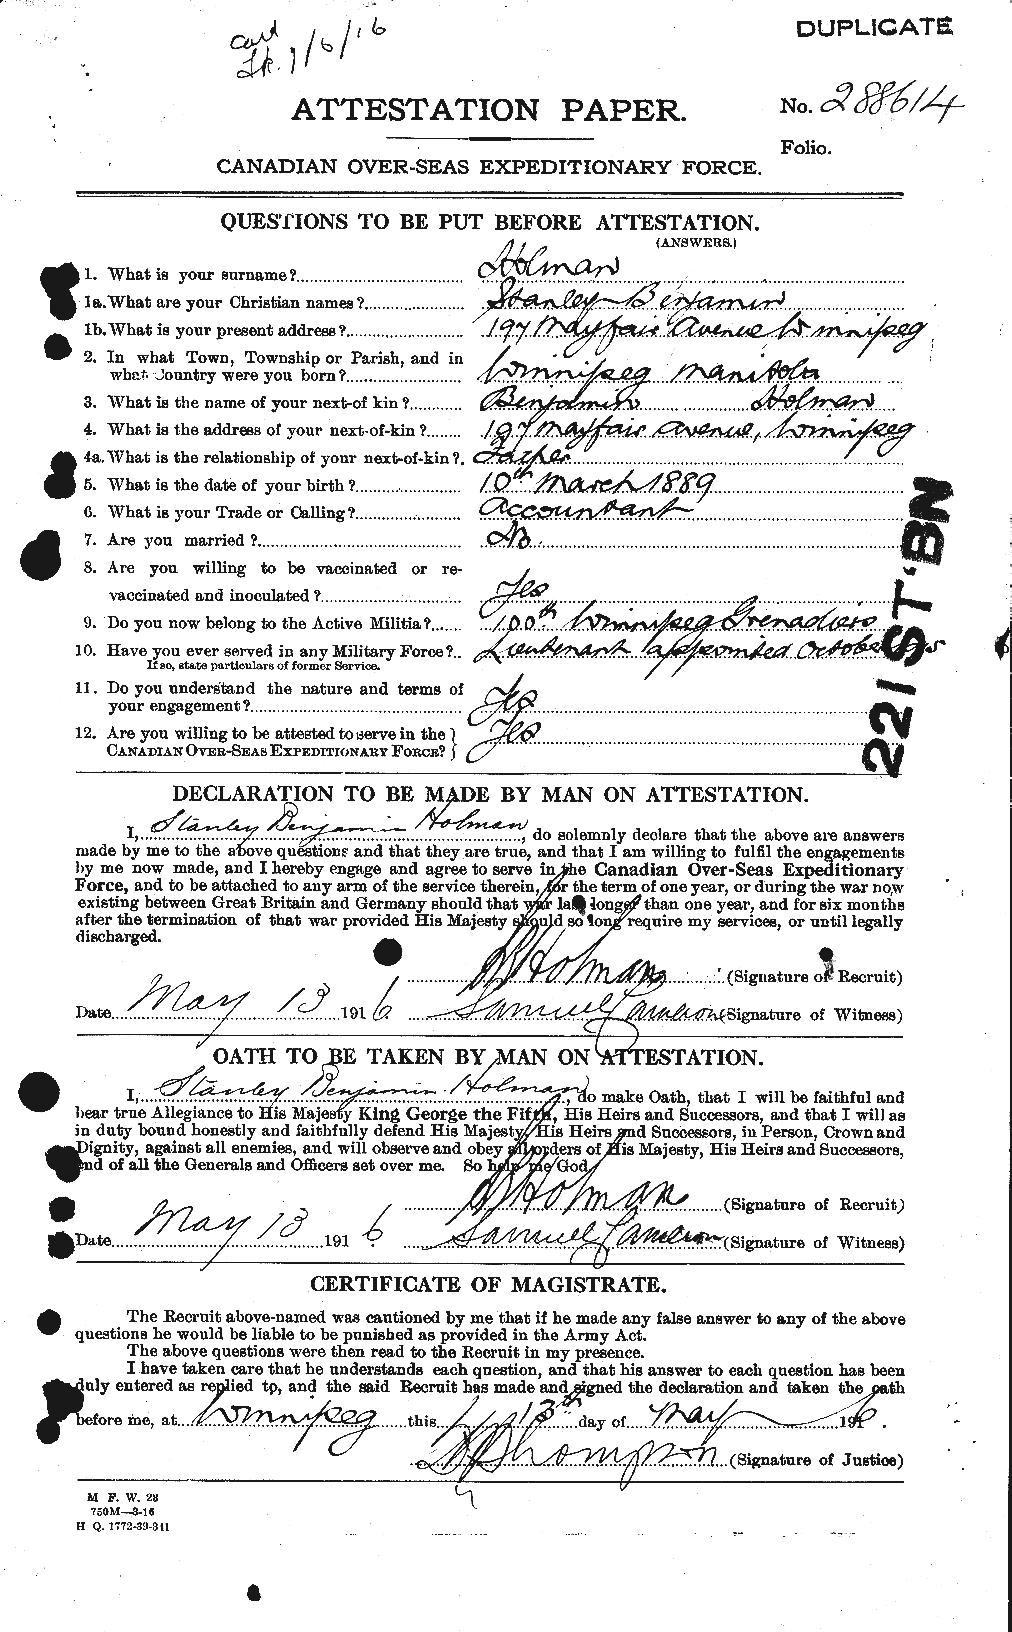 Personnel Records of the First World War - CEF 400259a